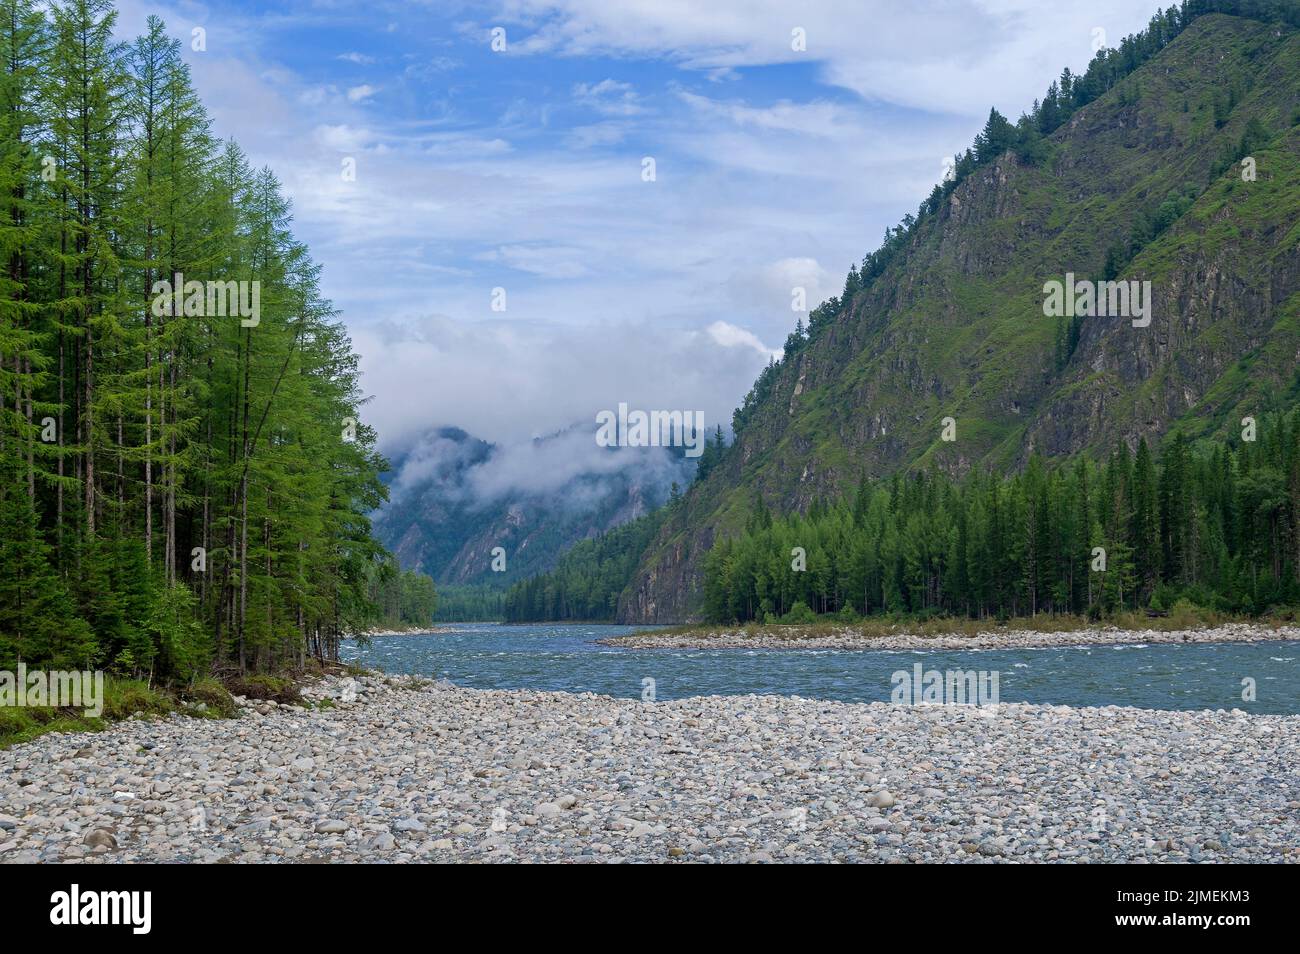 Low clouds in a mountain gorge over the river. Stock Photo